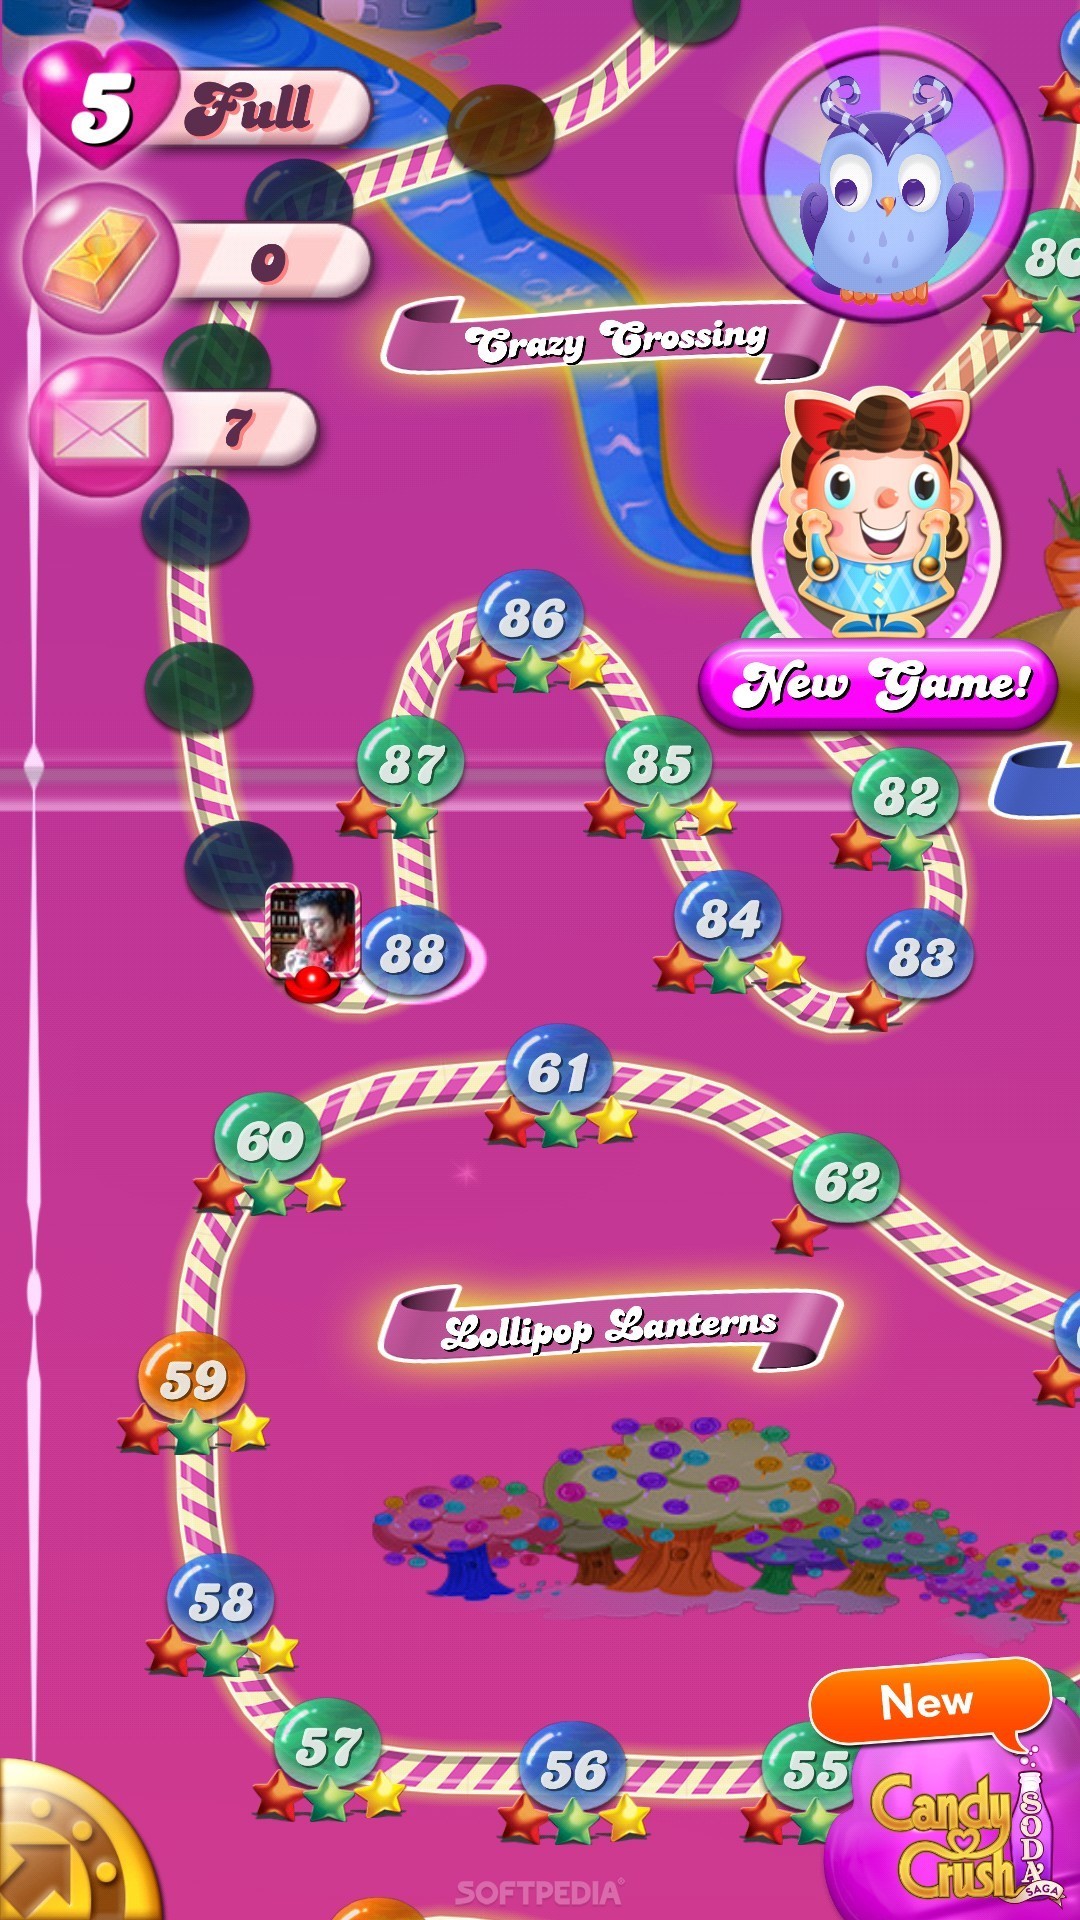 Sugar Overload: As of writing, there are over 2000 levels available in the game. Try to beat them all!